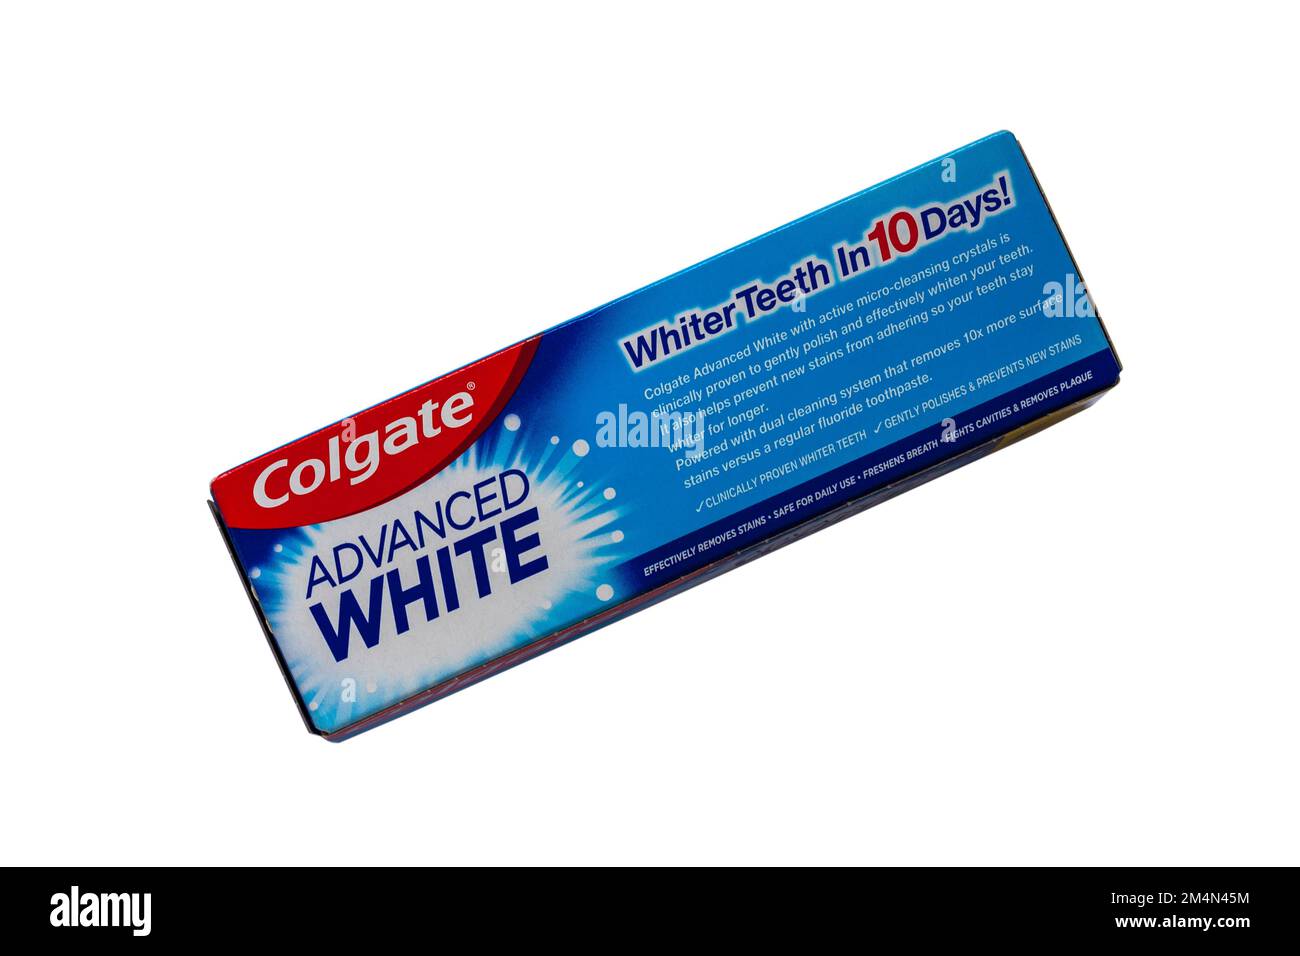 Colgate Advanced White toothpaste whiter teeth in 10 days clinically proven whiter teeth micro-cleansing crystals isolated on white background Stock Photo